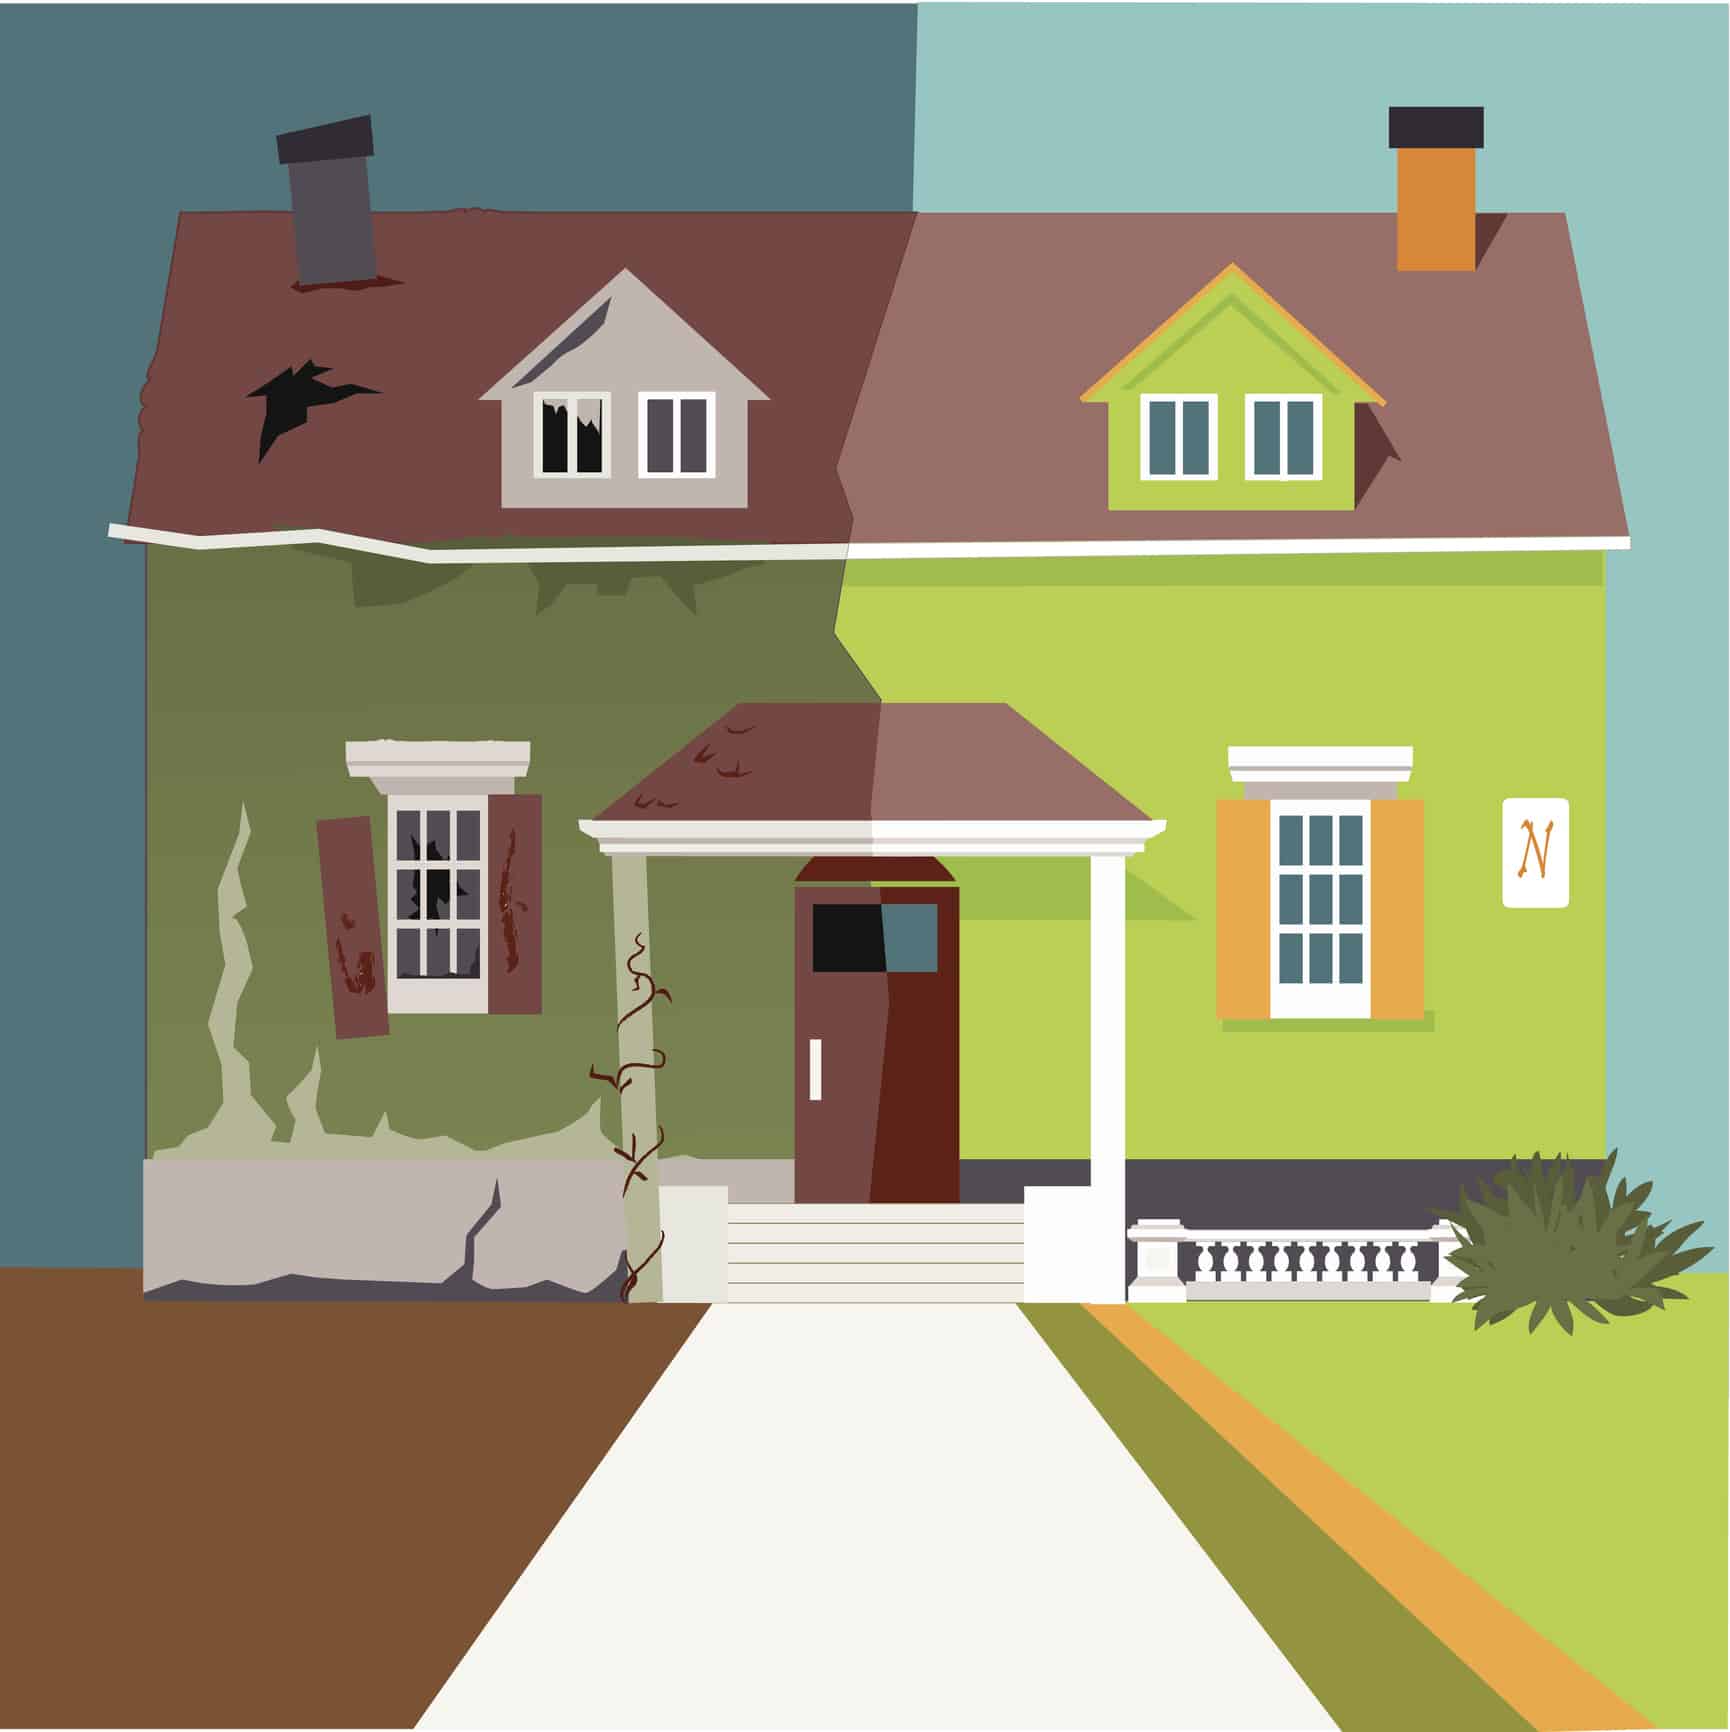 House before and after a renovation, vector illustration